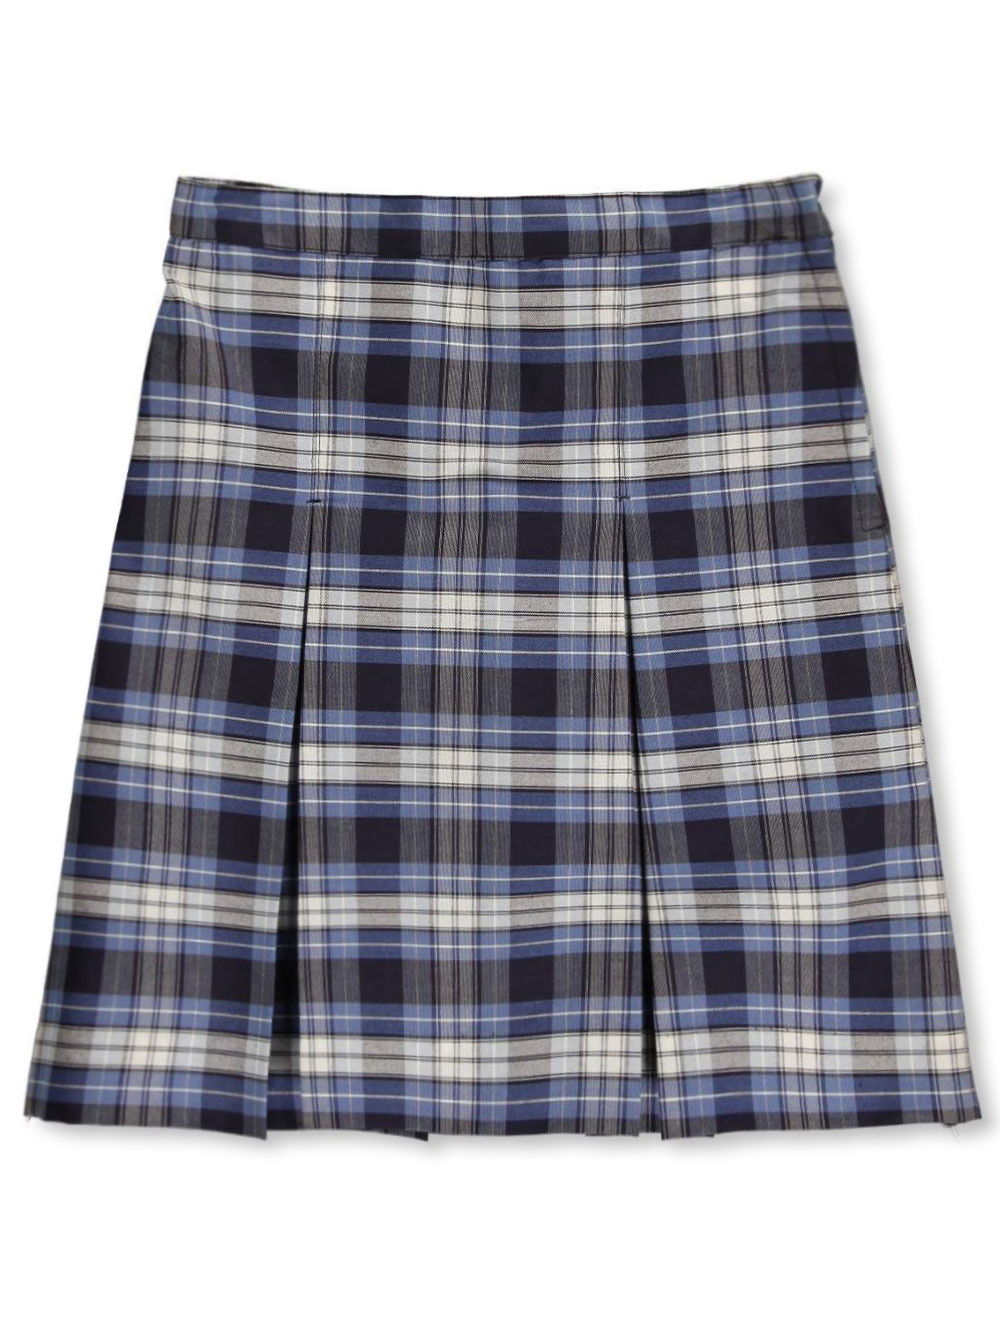 Cookie's Brand Girls' Pleated Skirt - blue/white *plaid #76*, 10